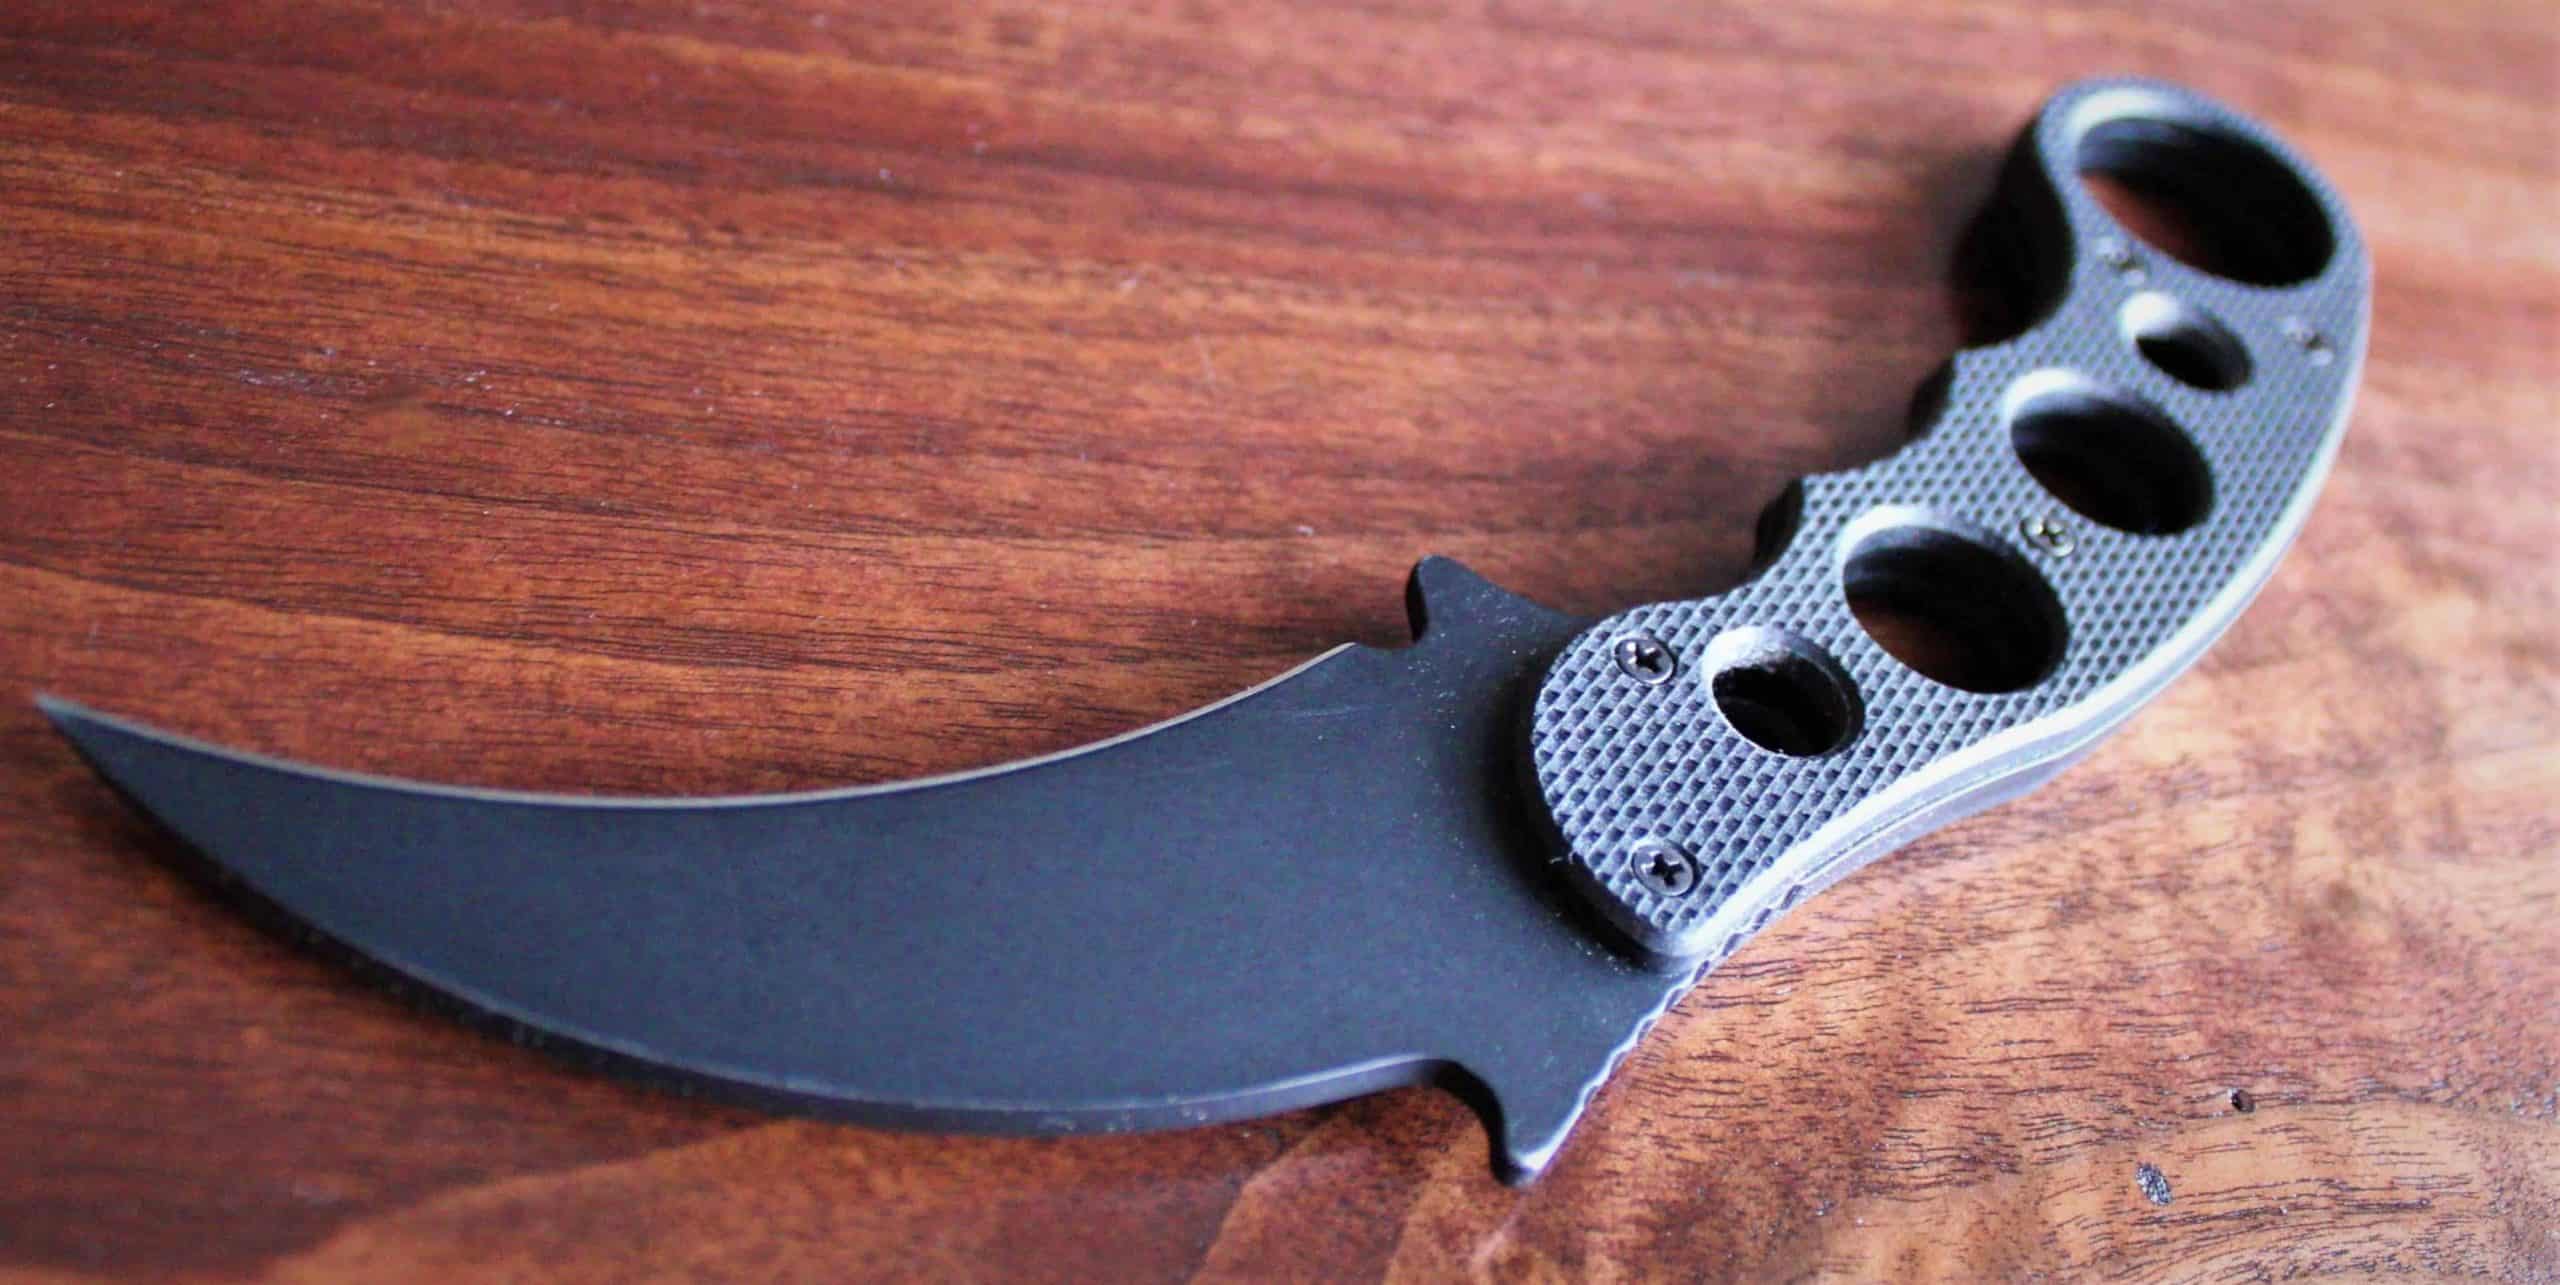 Survival Gear Review: Emerson Karambit Fixed Blade Knife